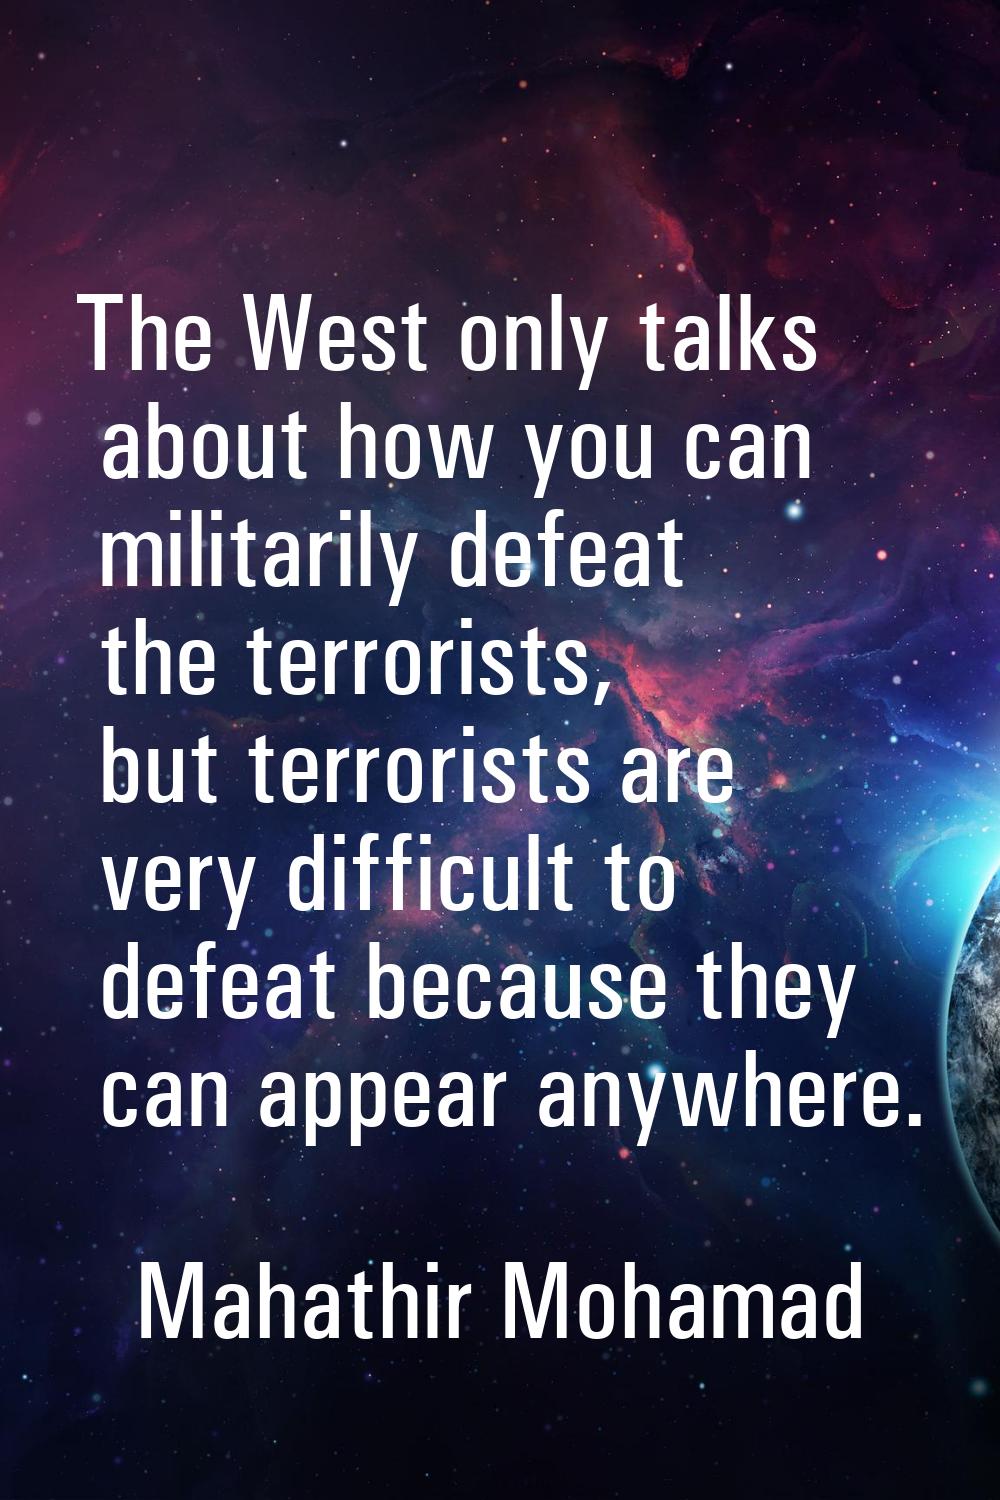 The West only talks about how you can militarily defeat the terrorists, but terrorists are very dif